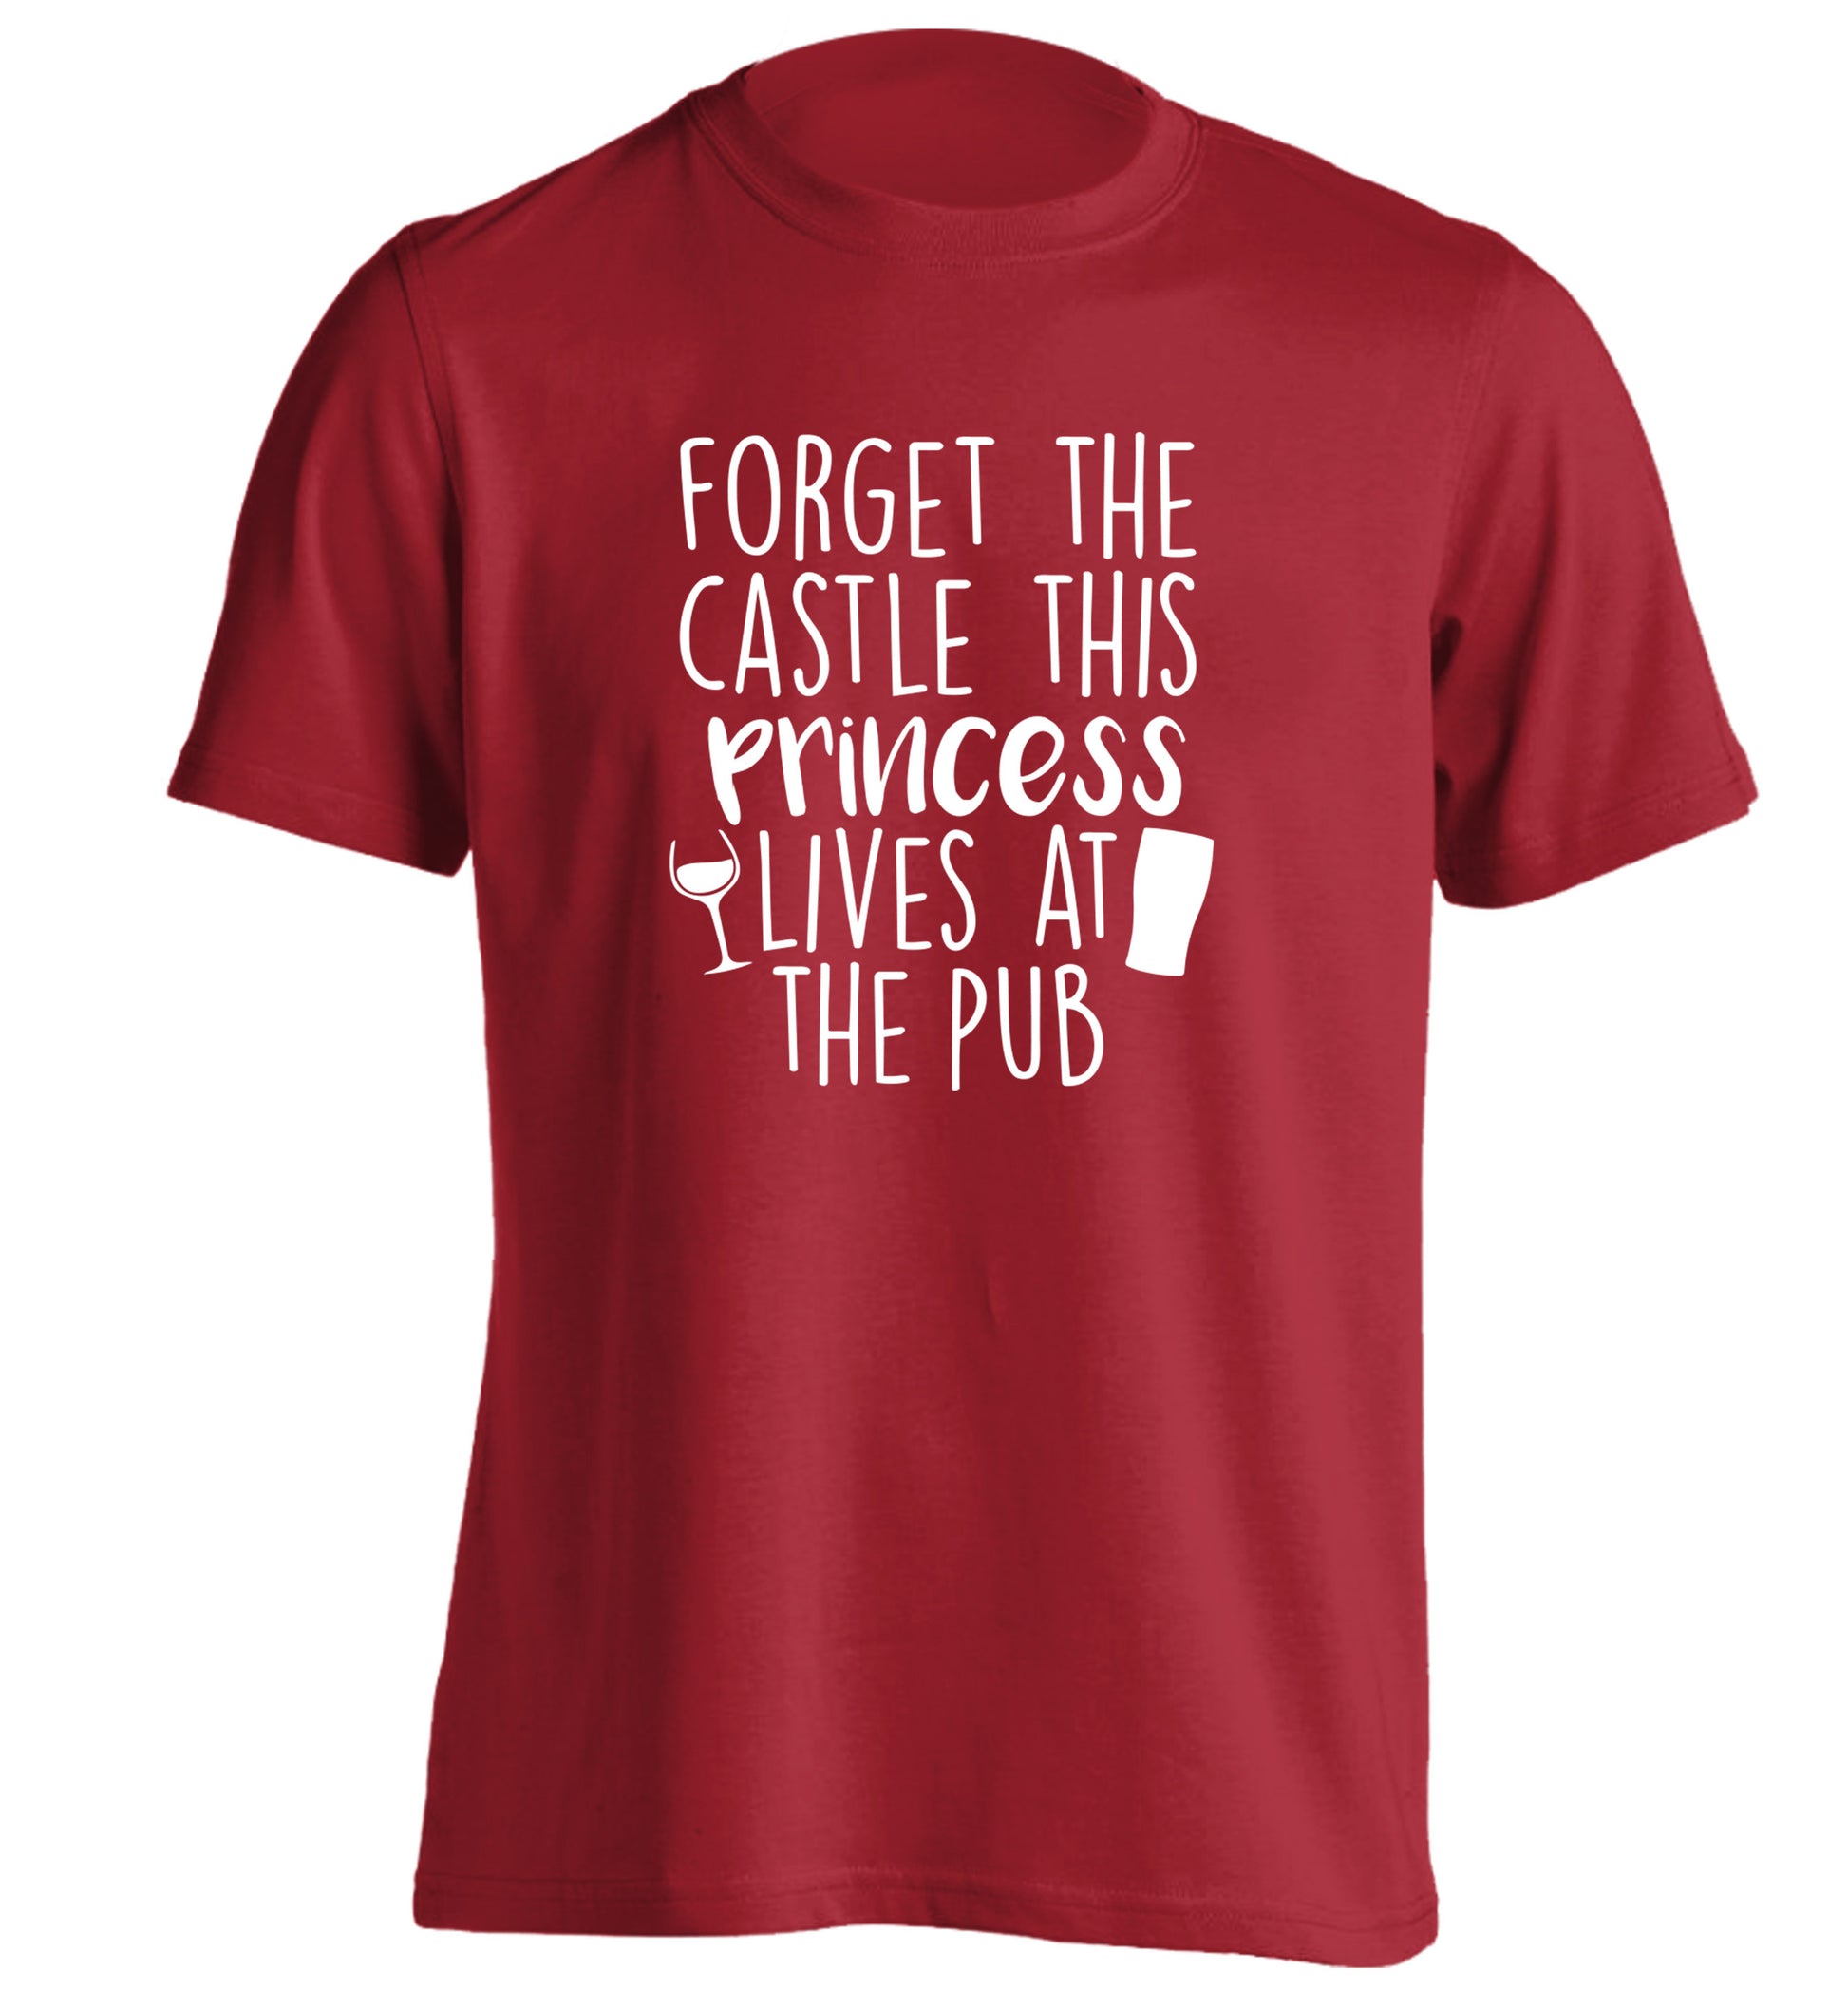 Forget the castle this princess lives at the pub adults unisex red Tshirt 2XL